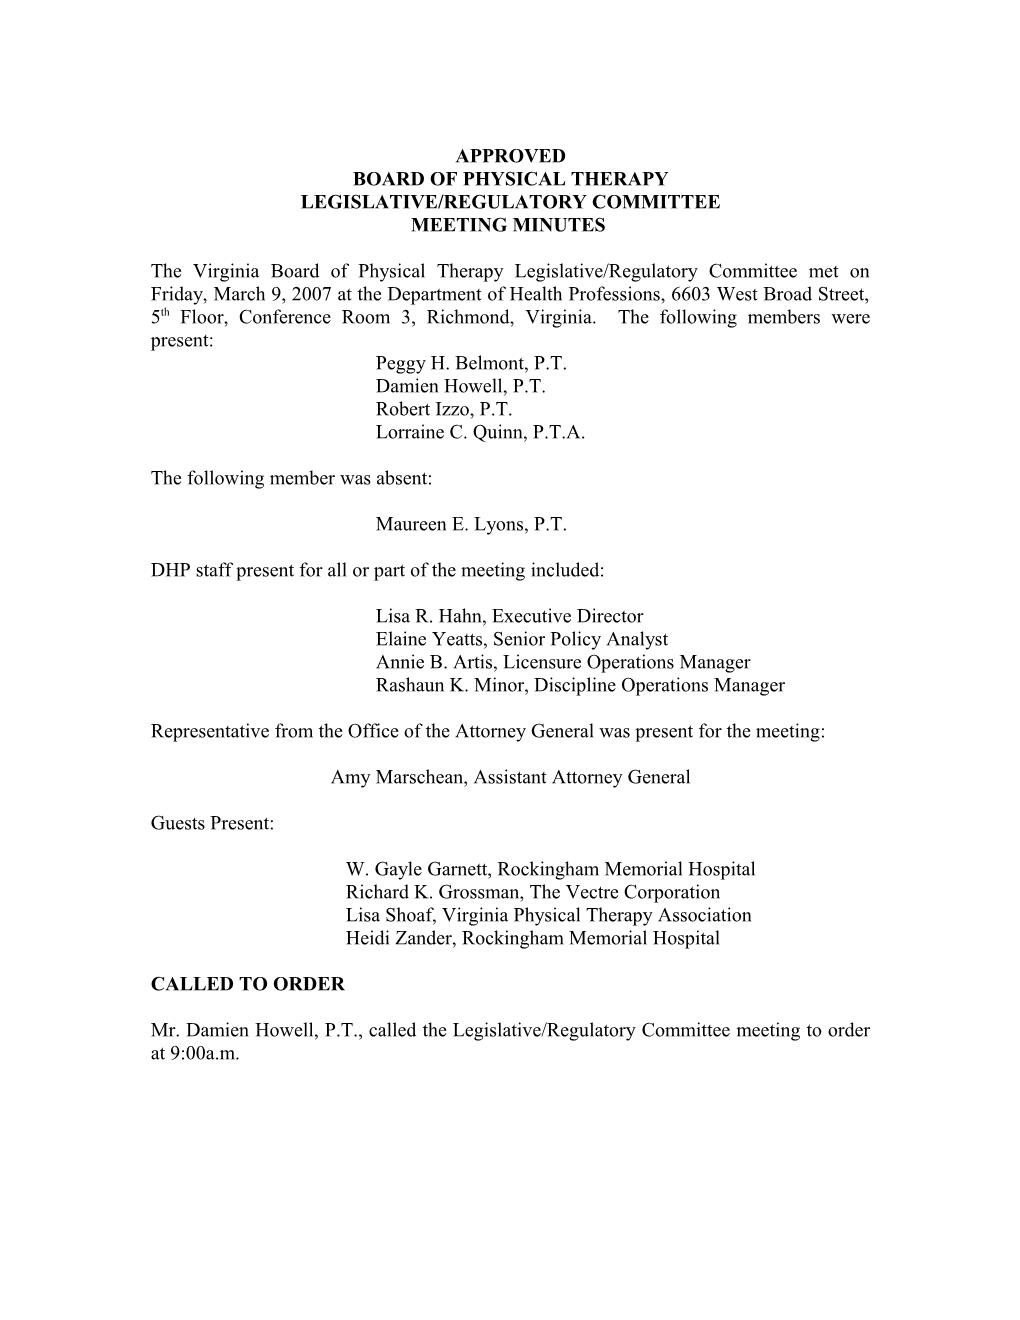 Physical Therapy-Legislative/Regulatory Committee Meeting Minutes March 9, 2007